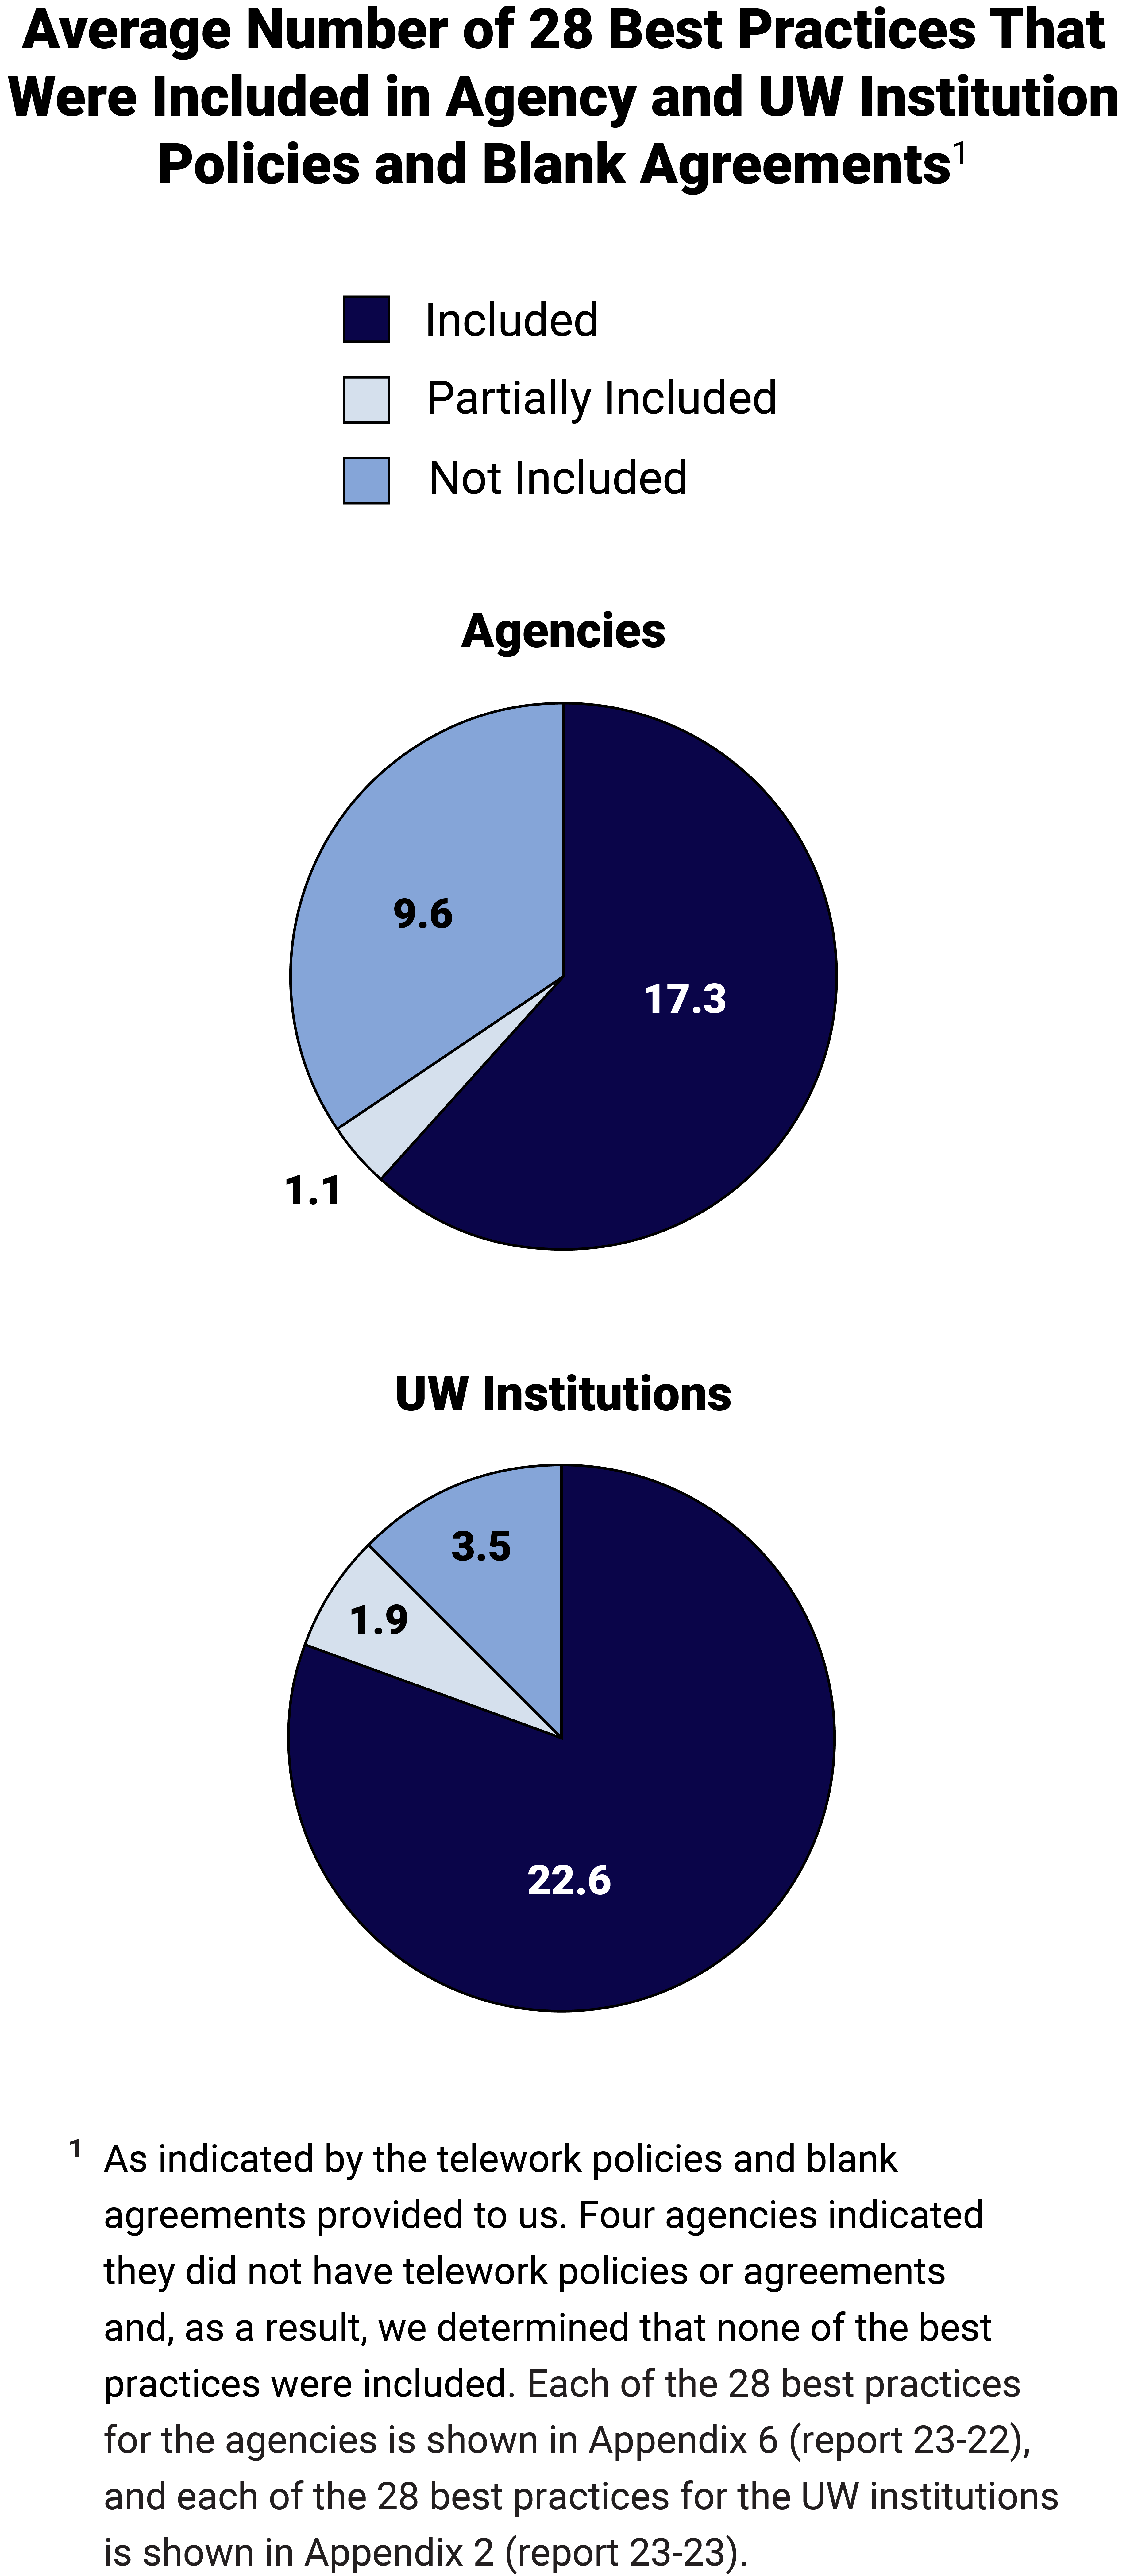 Pie charts showing the average number of 28 best practicies that were included in agency and UW policies and blank agreements.